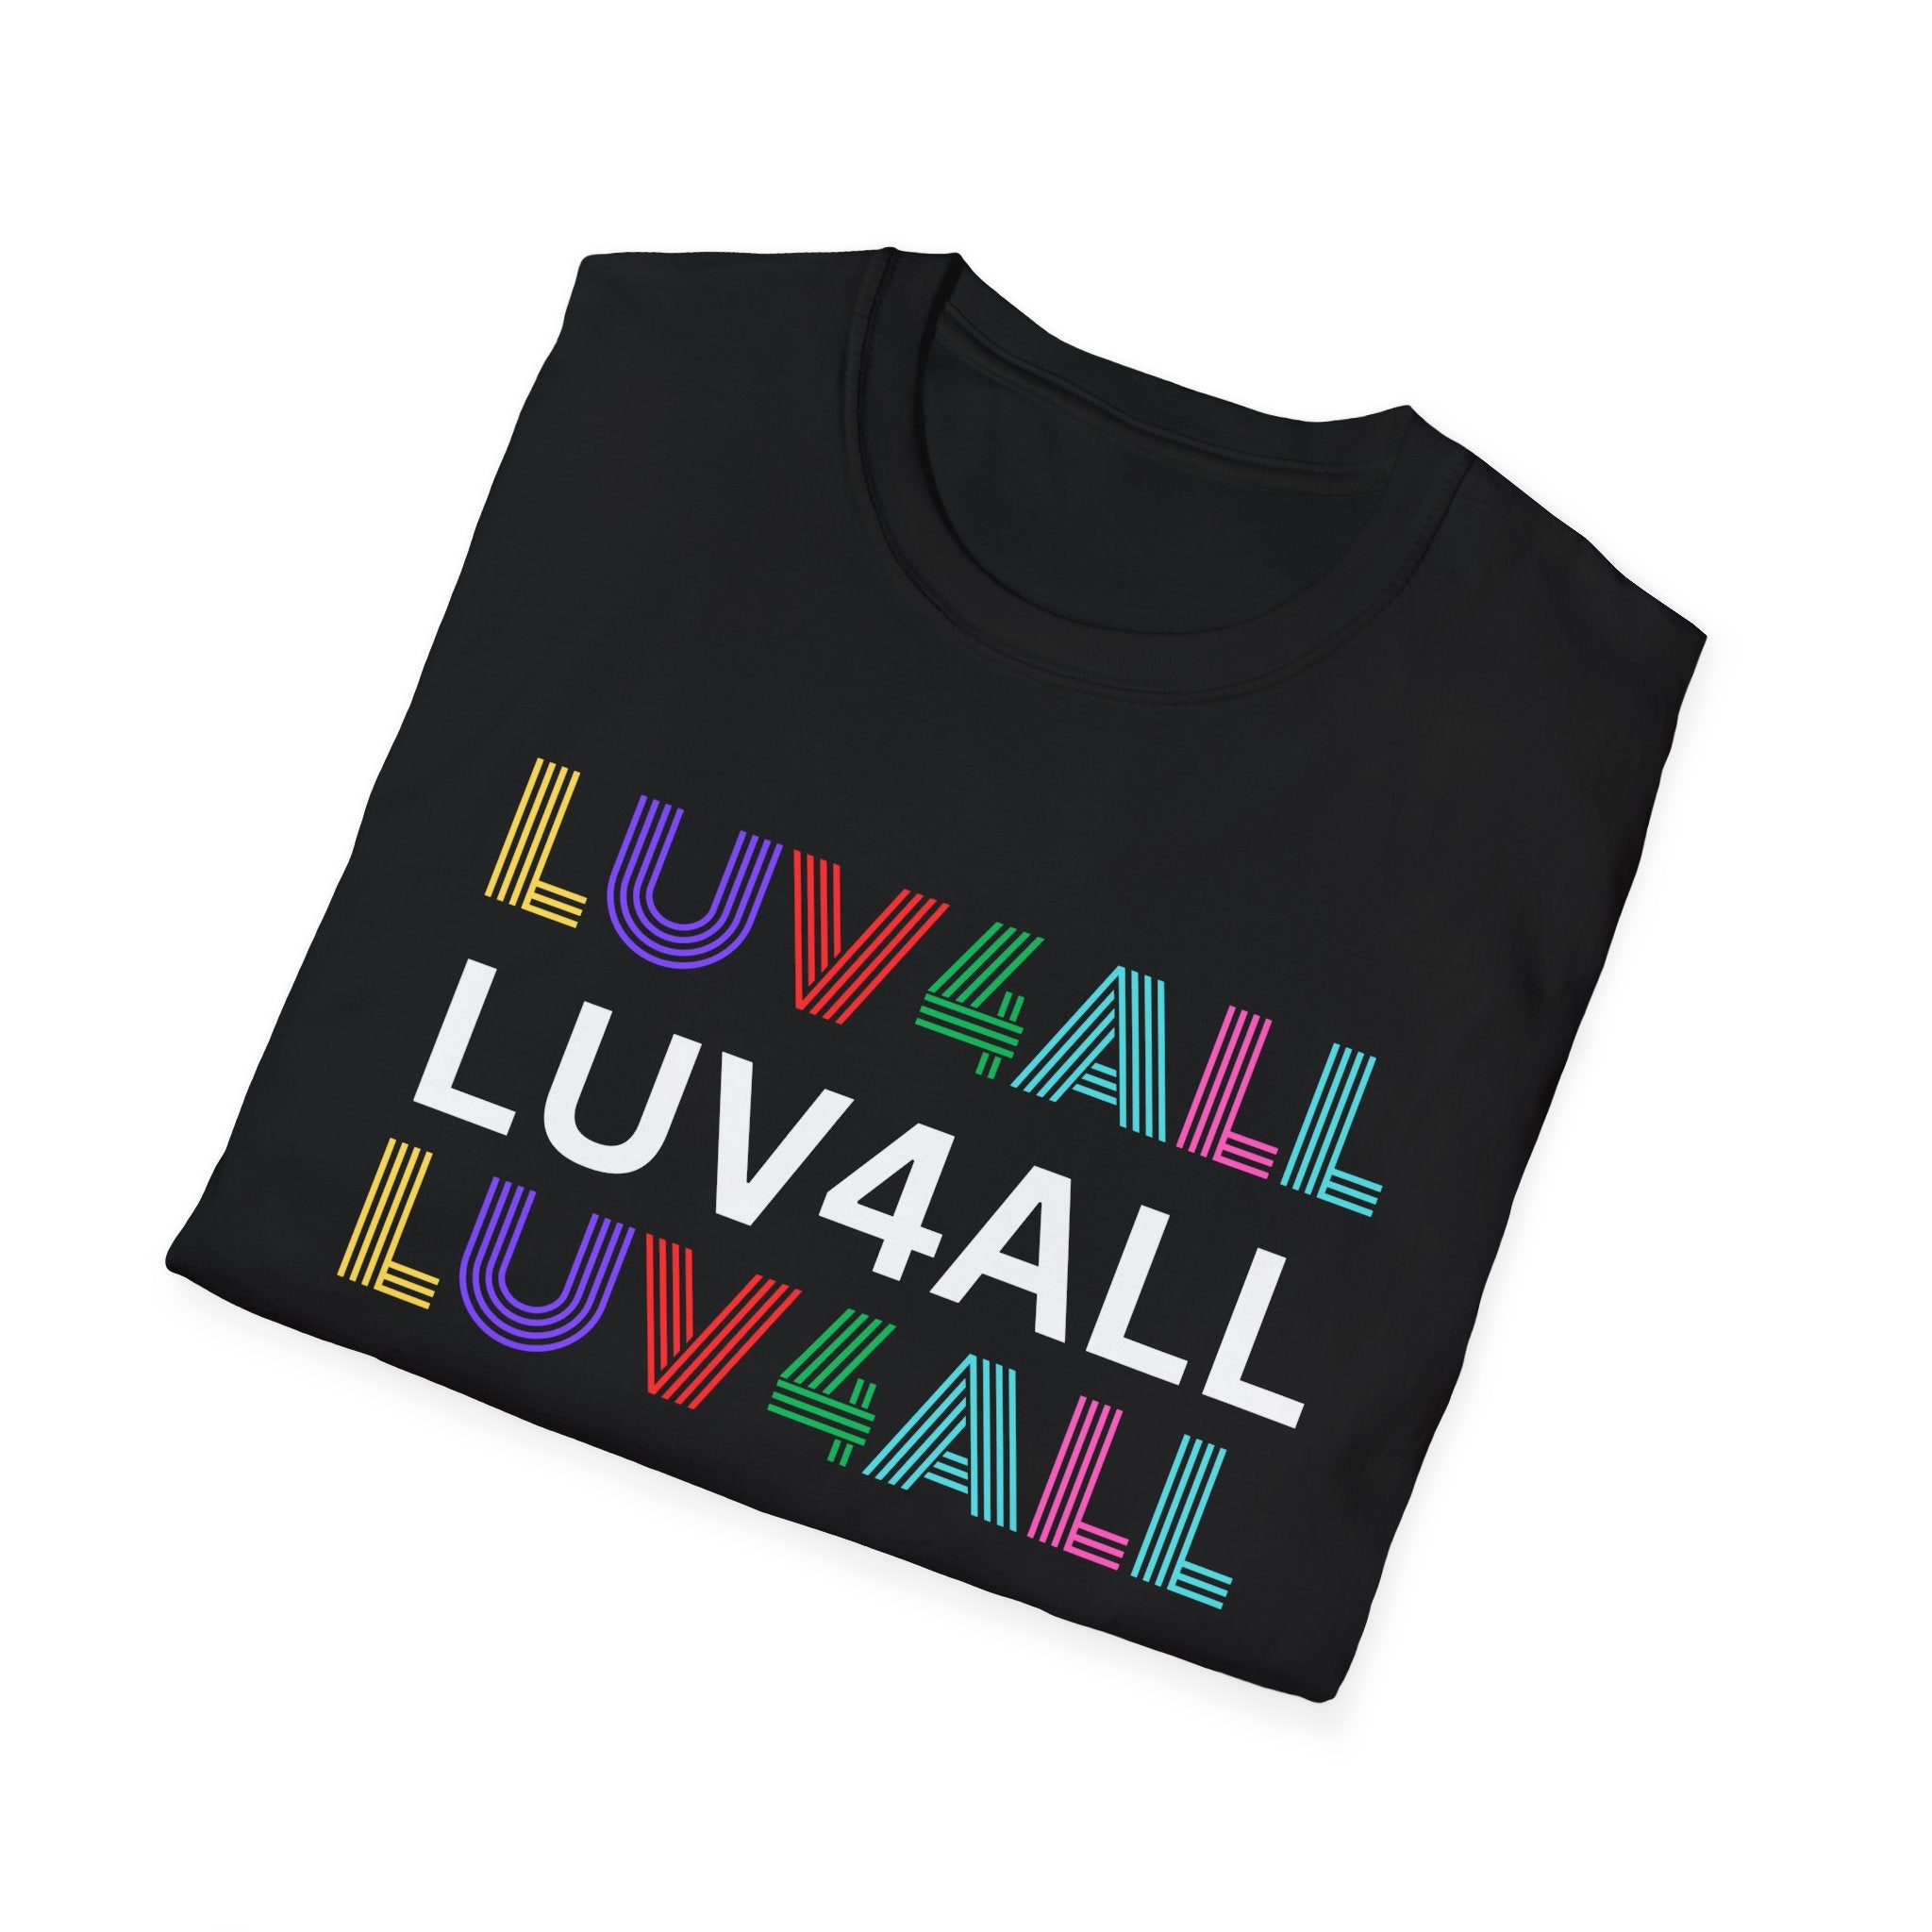 LUV4ALL Unisex Softstyle T-Shirt, Kindness T-shirt